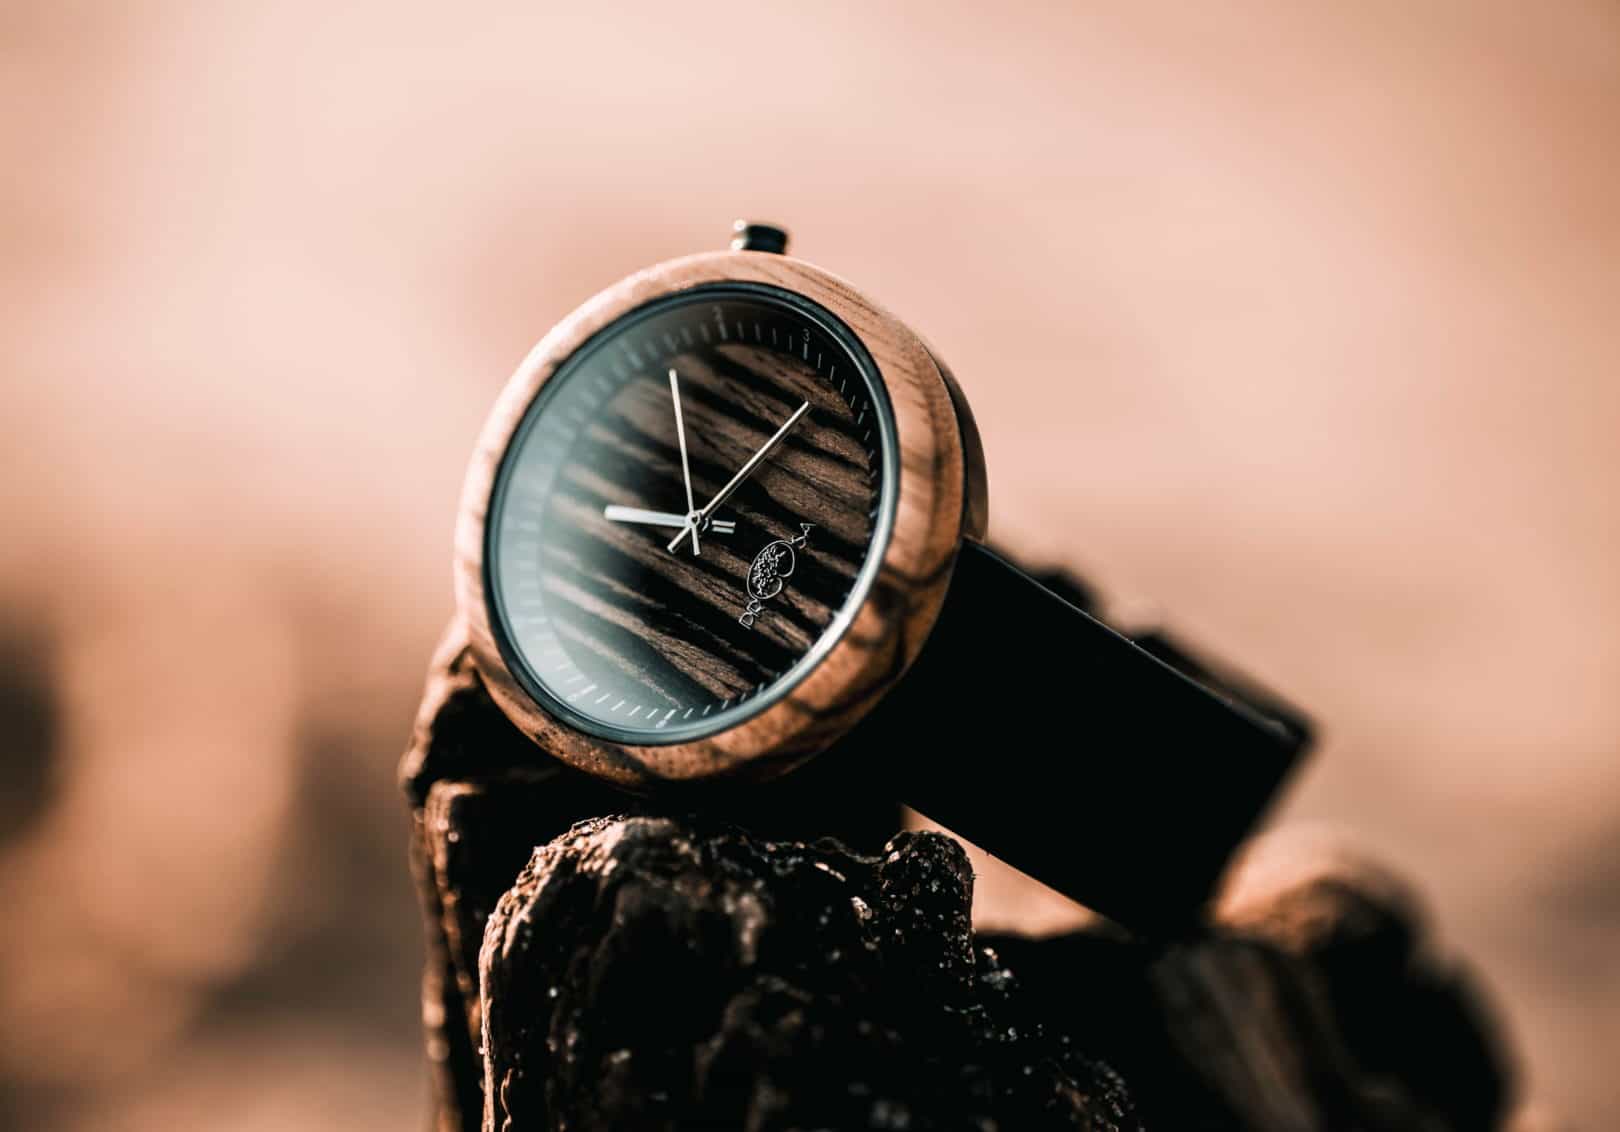 Wood and metal watch from zebra wood - model Tribe by Prosaoowd